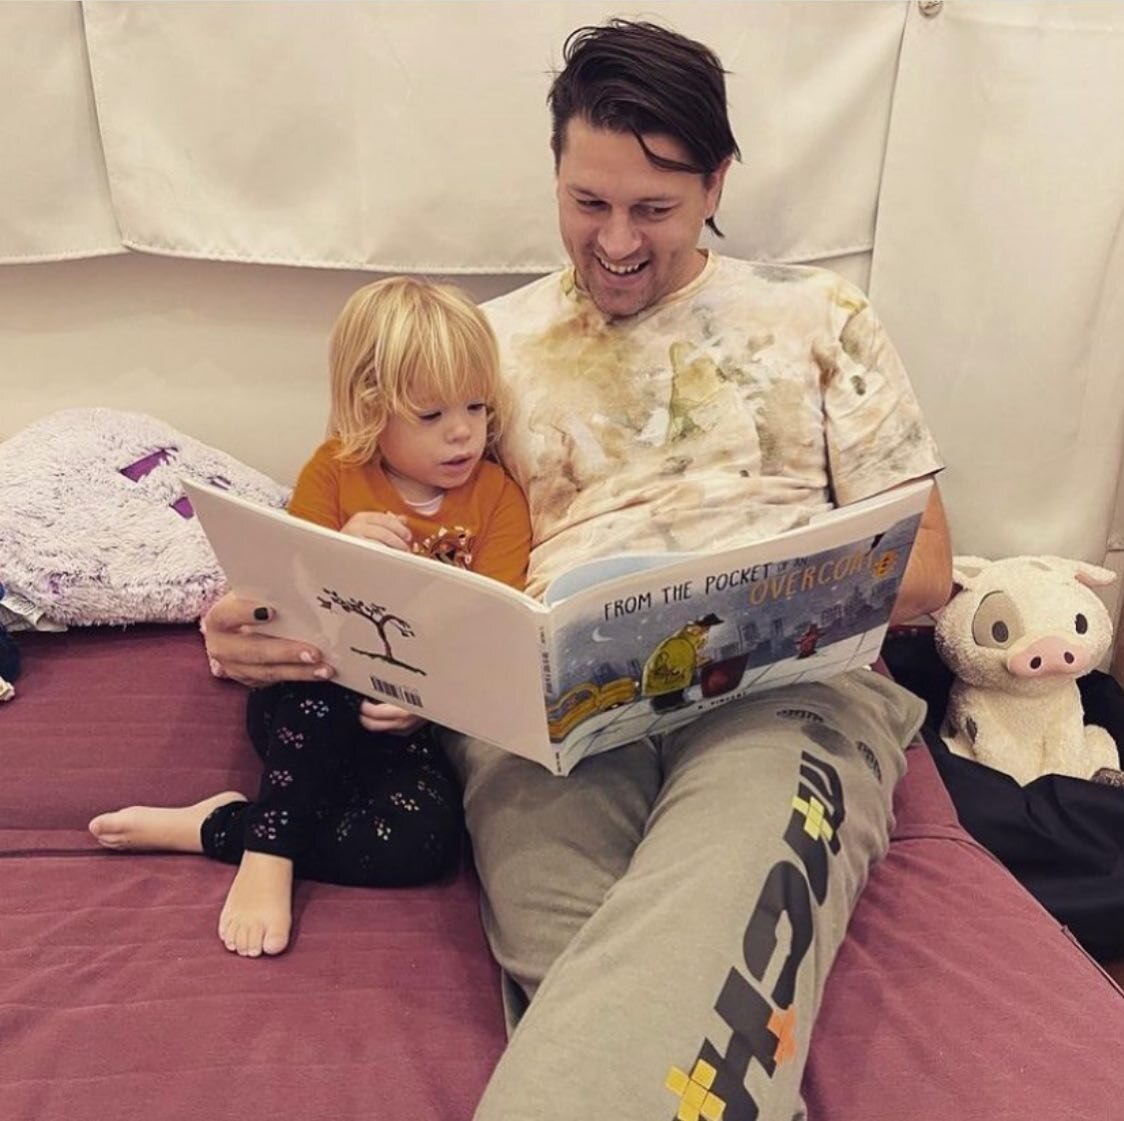 No cozier set up than this 🥰 @fire.daddy81 and his little one are clearly #MaxBuckles fans. #fromthepocketofanovercoat #readshareenjoymax #maxbuckleabooks